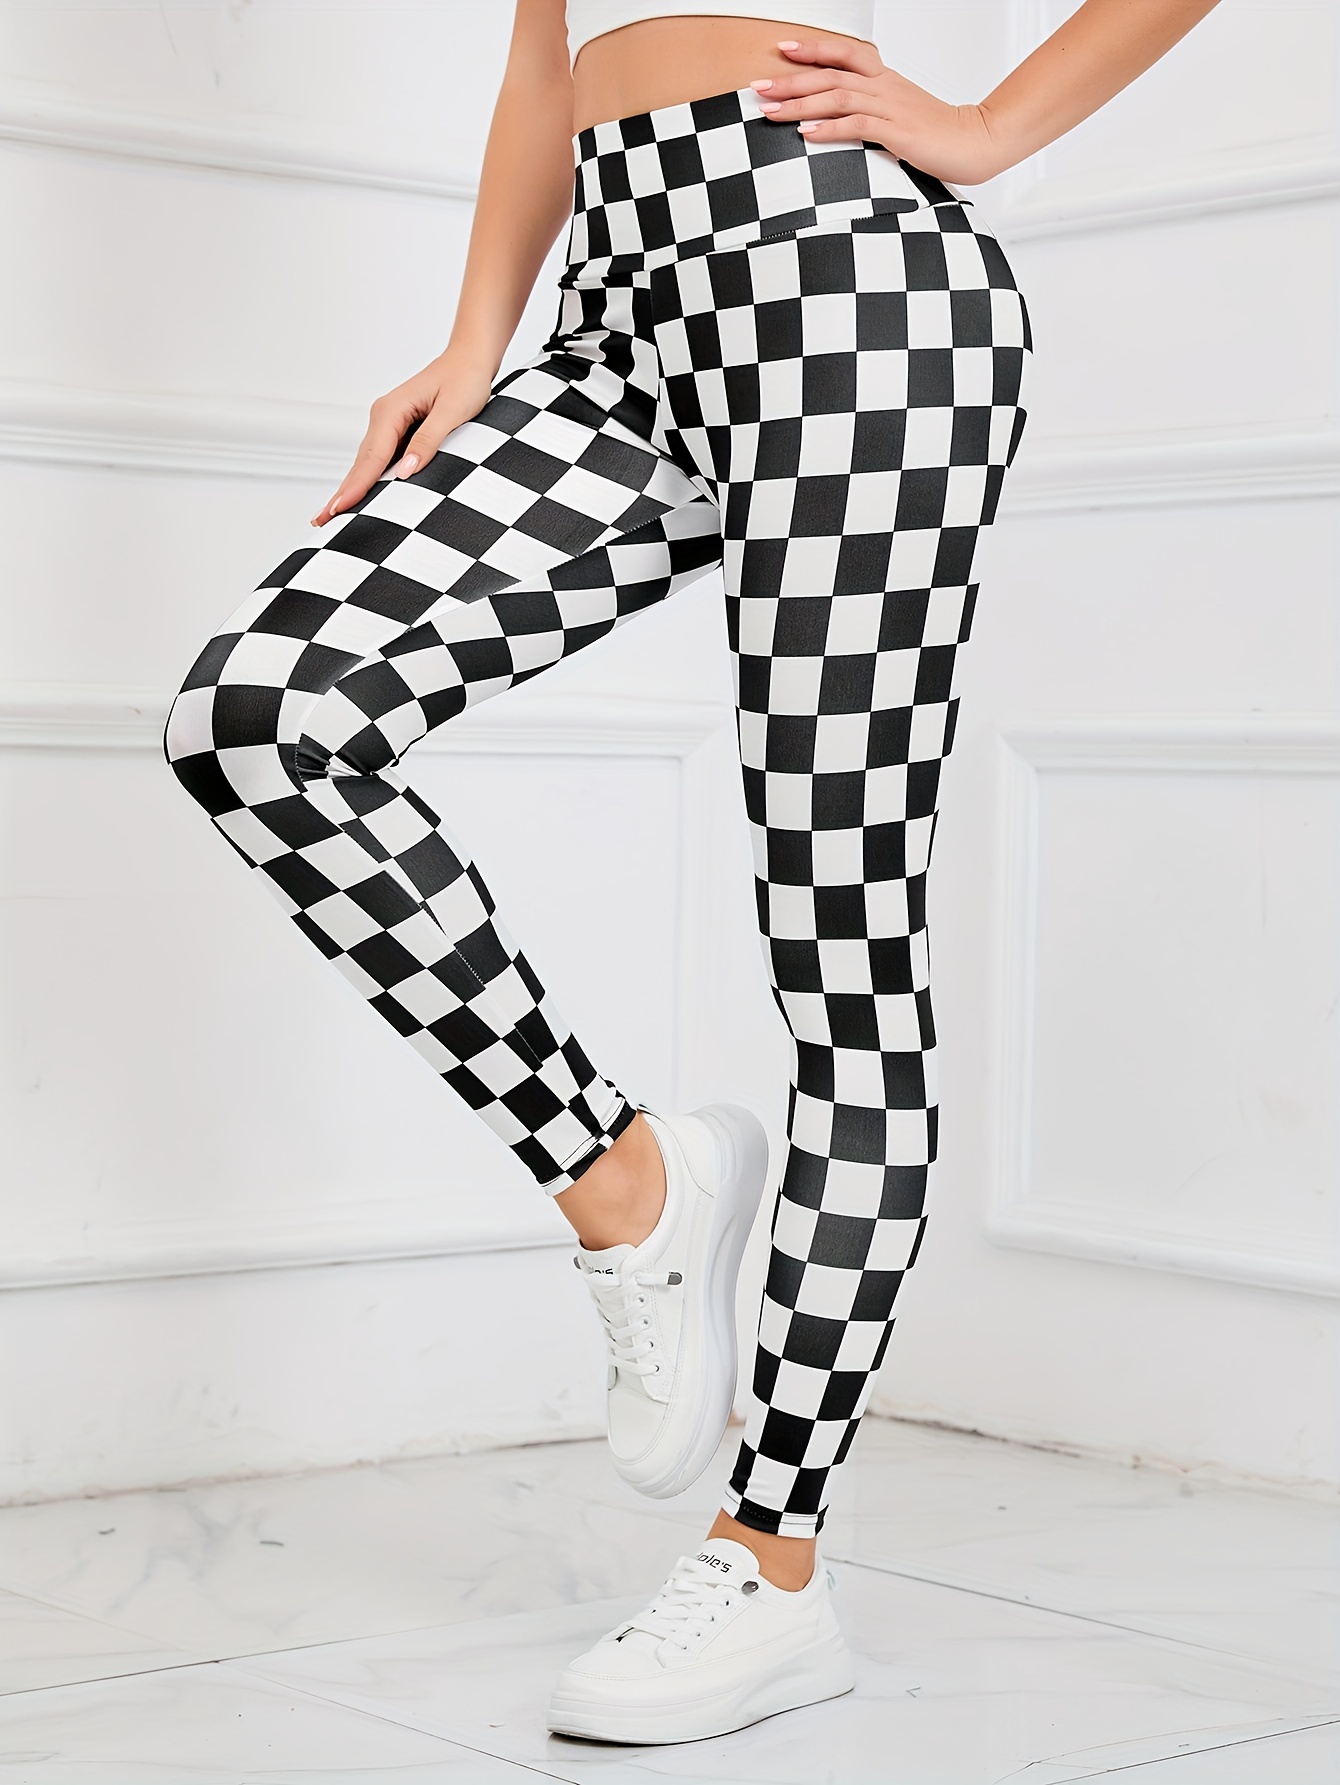 Printed Leggings High Waisted Black and Thin White Color with